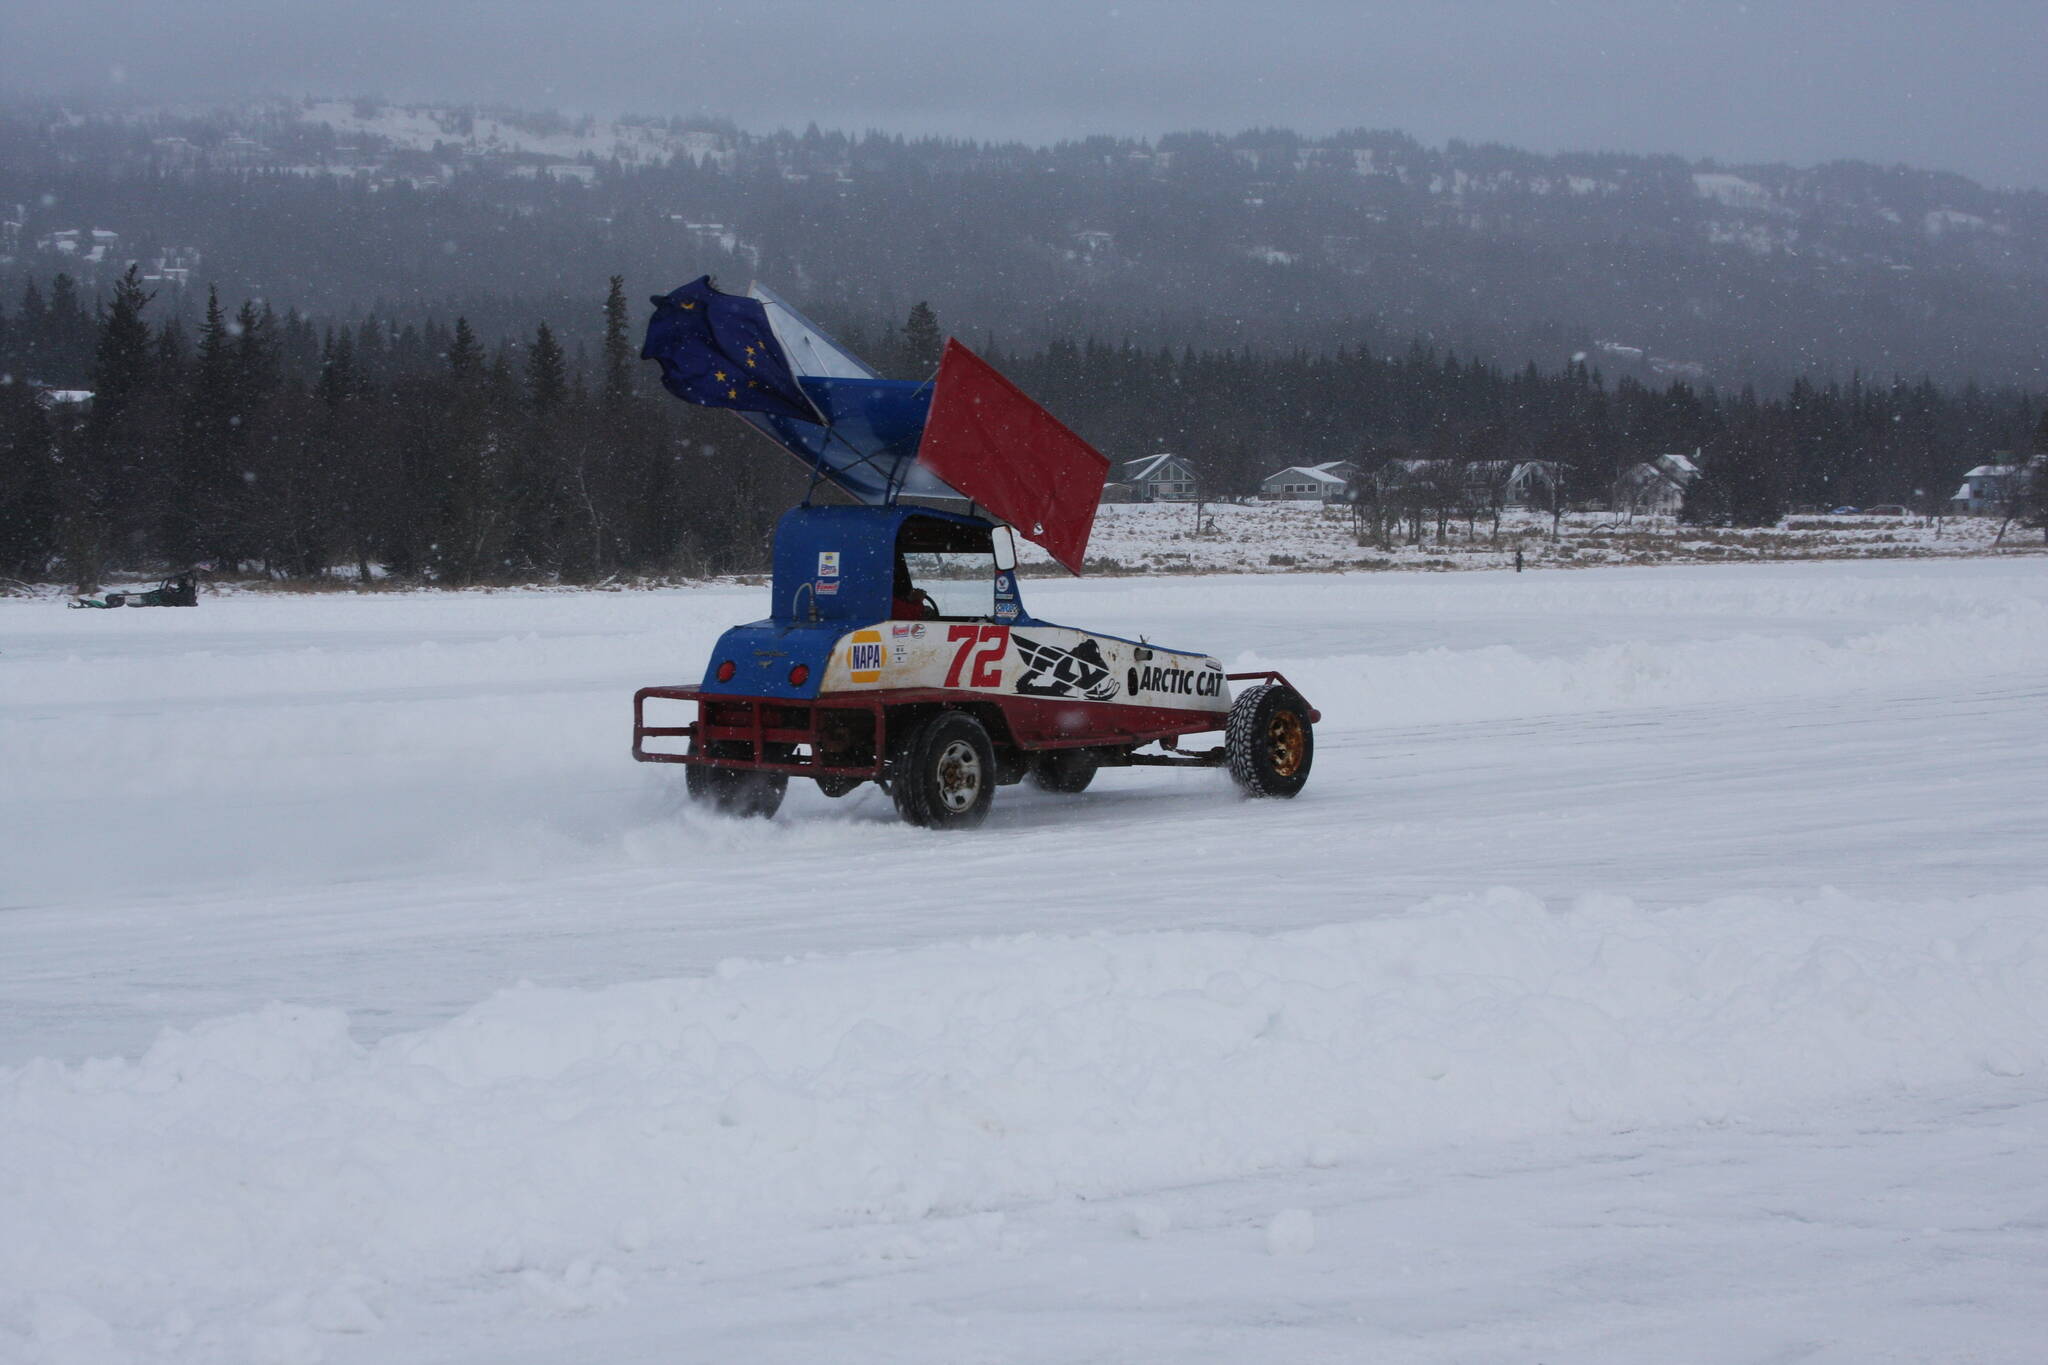 Photo by Delcenia Cosman/Homer News
A driver with the Homer Racing Association races around a plowed track on the frozen Beluga Lake on Saturday. Because of a lack of snow to create sufficiently sized safety berms on the ice track, the ice racing event scheduled after the Winter Carnival parade was scaled down. Racers sped around the track individually or racing in pairs.